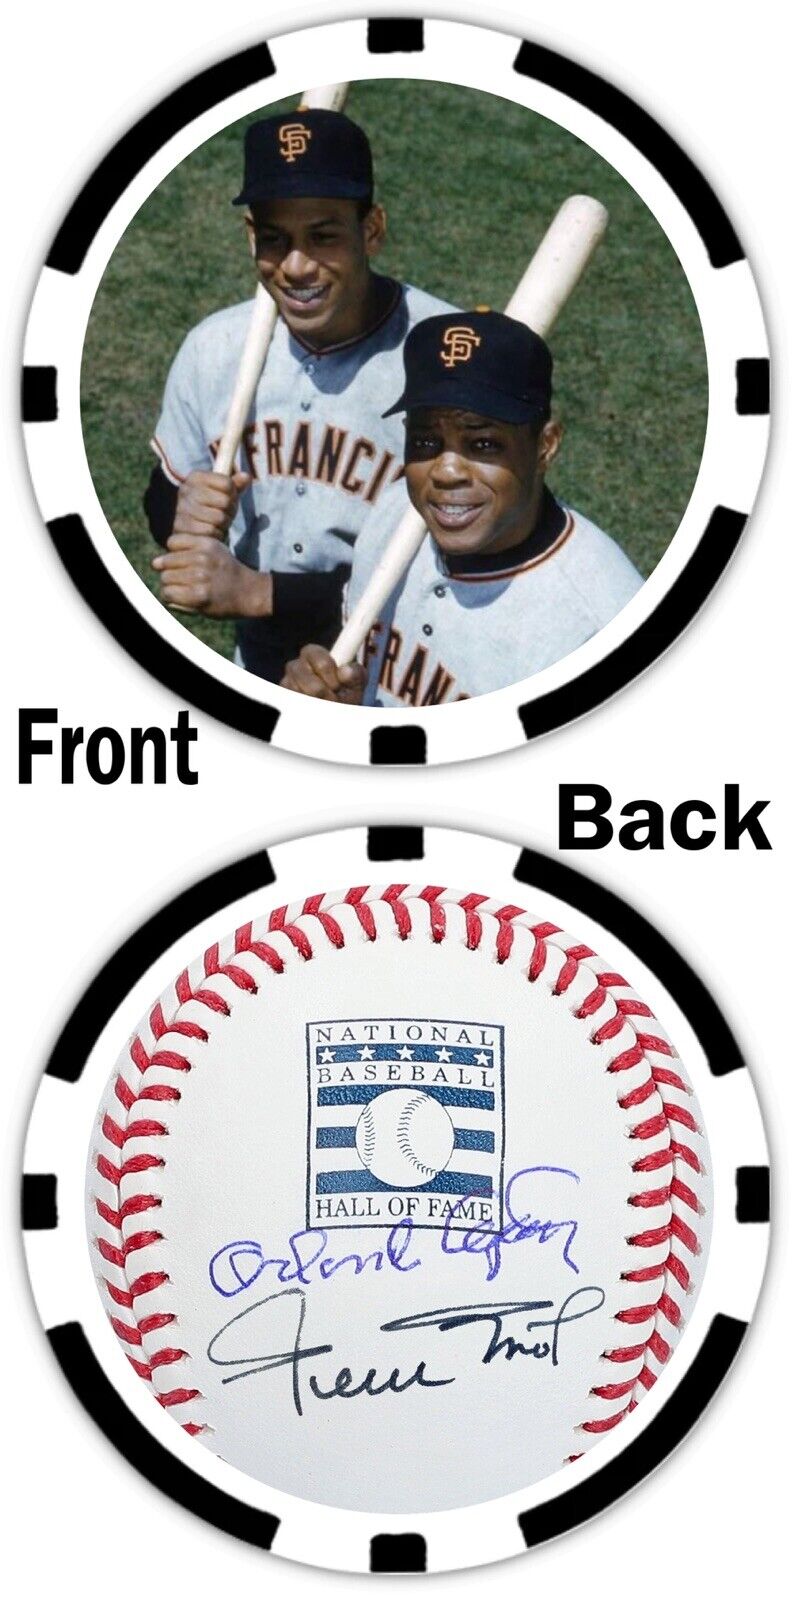 Orlando Cepeda & Willie Mays - HALL OF FAME - COMMEMORATIVE POKER CHIP *SIGNED*